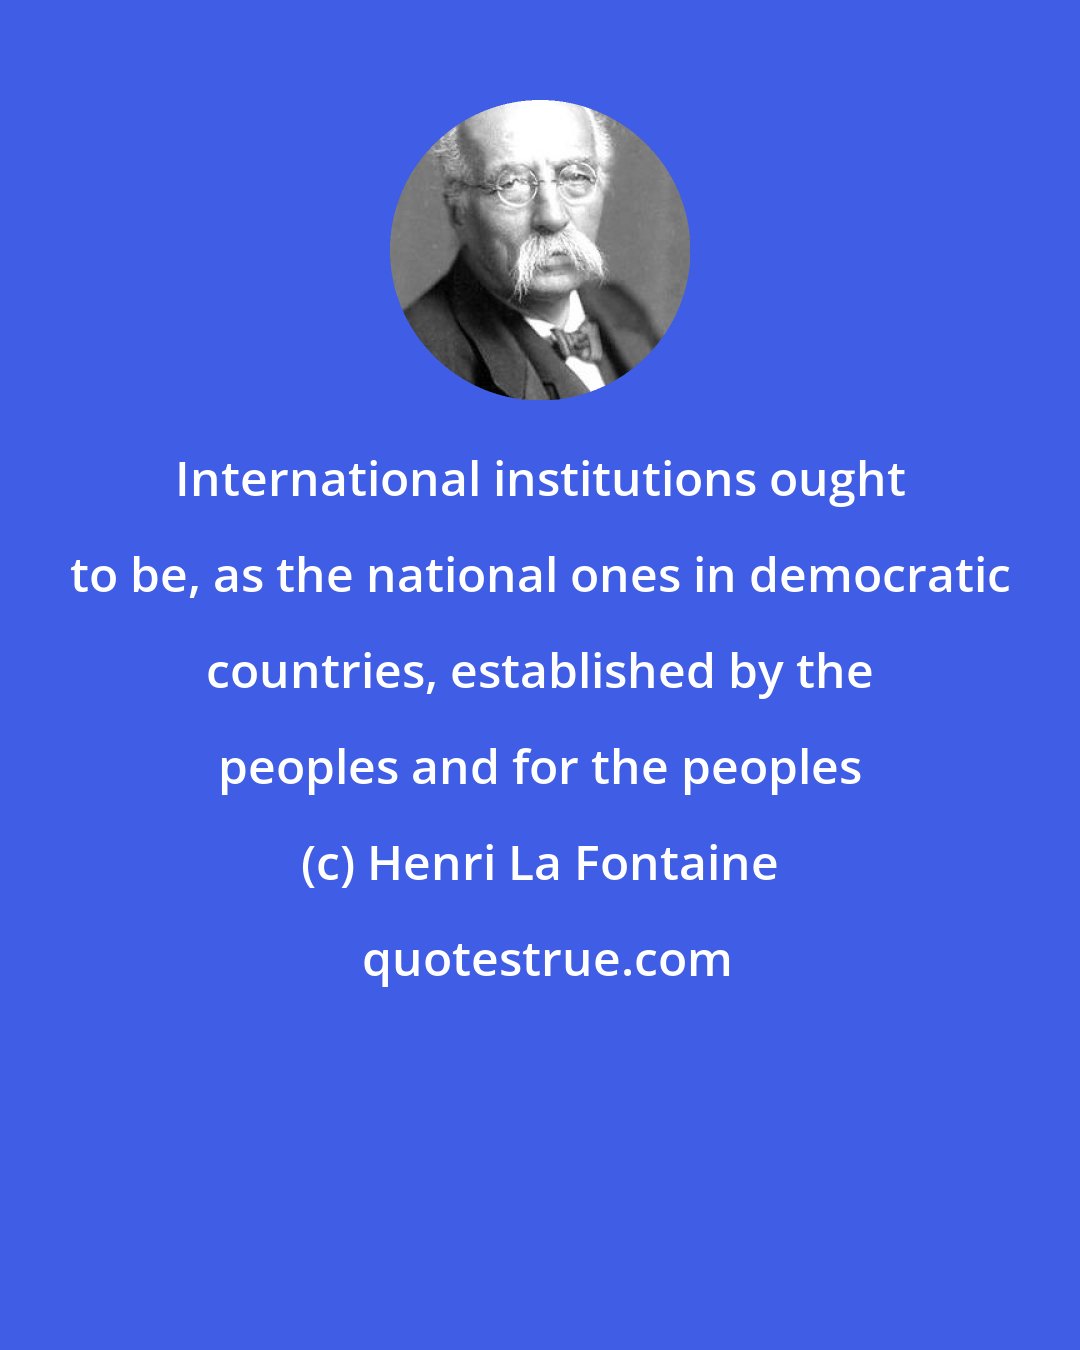 Henri La Fontaine: International institutions ought to be, as the national ones in democratic countries, established by the peoples and for the peoples